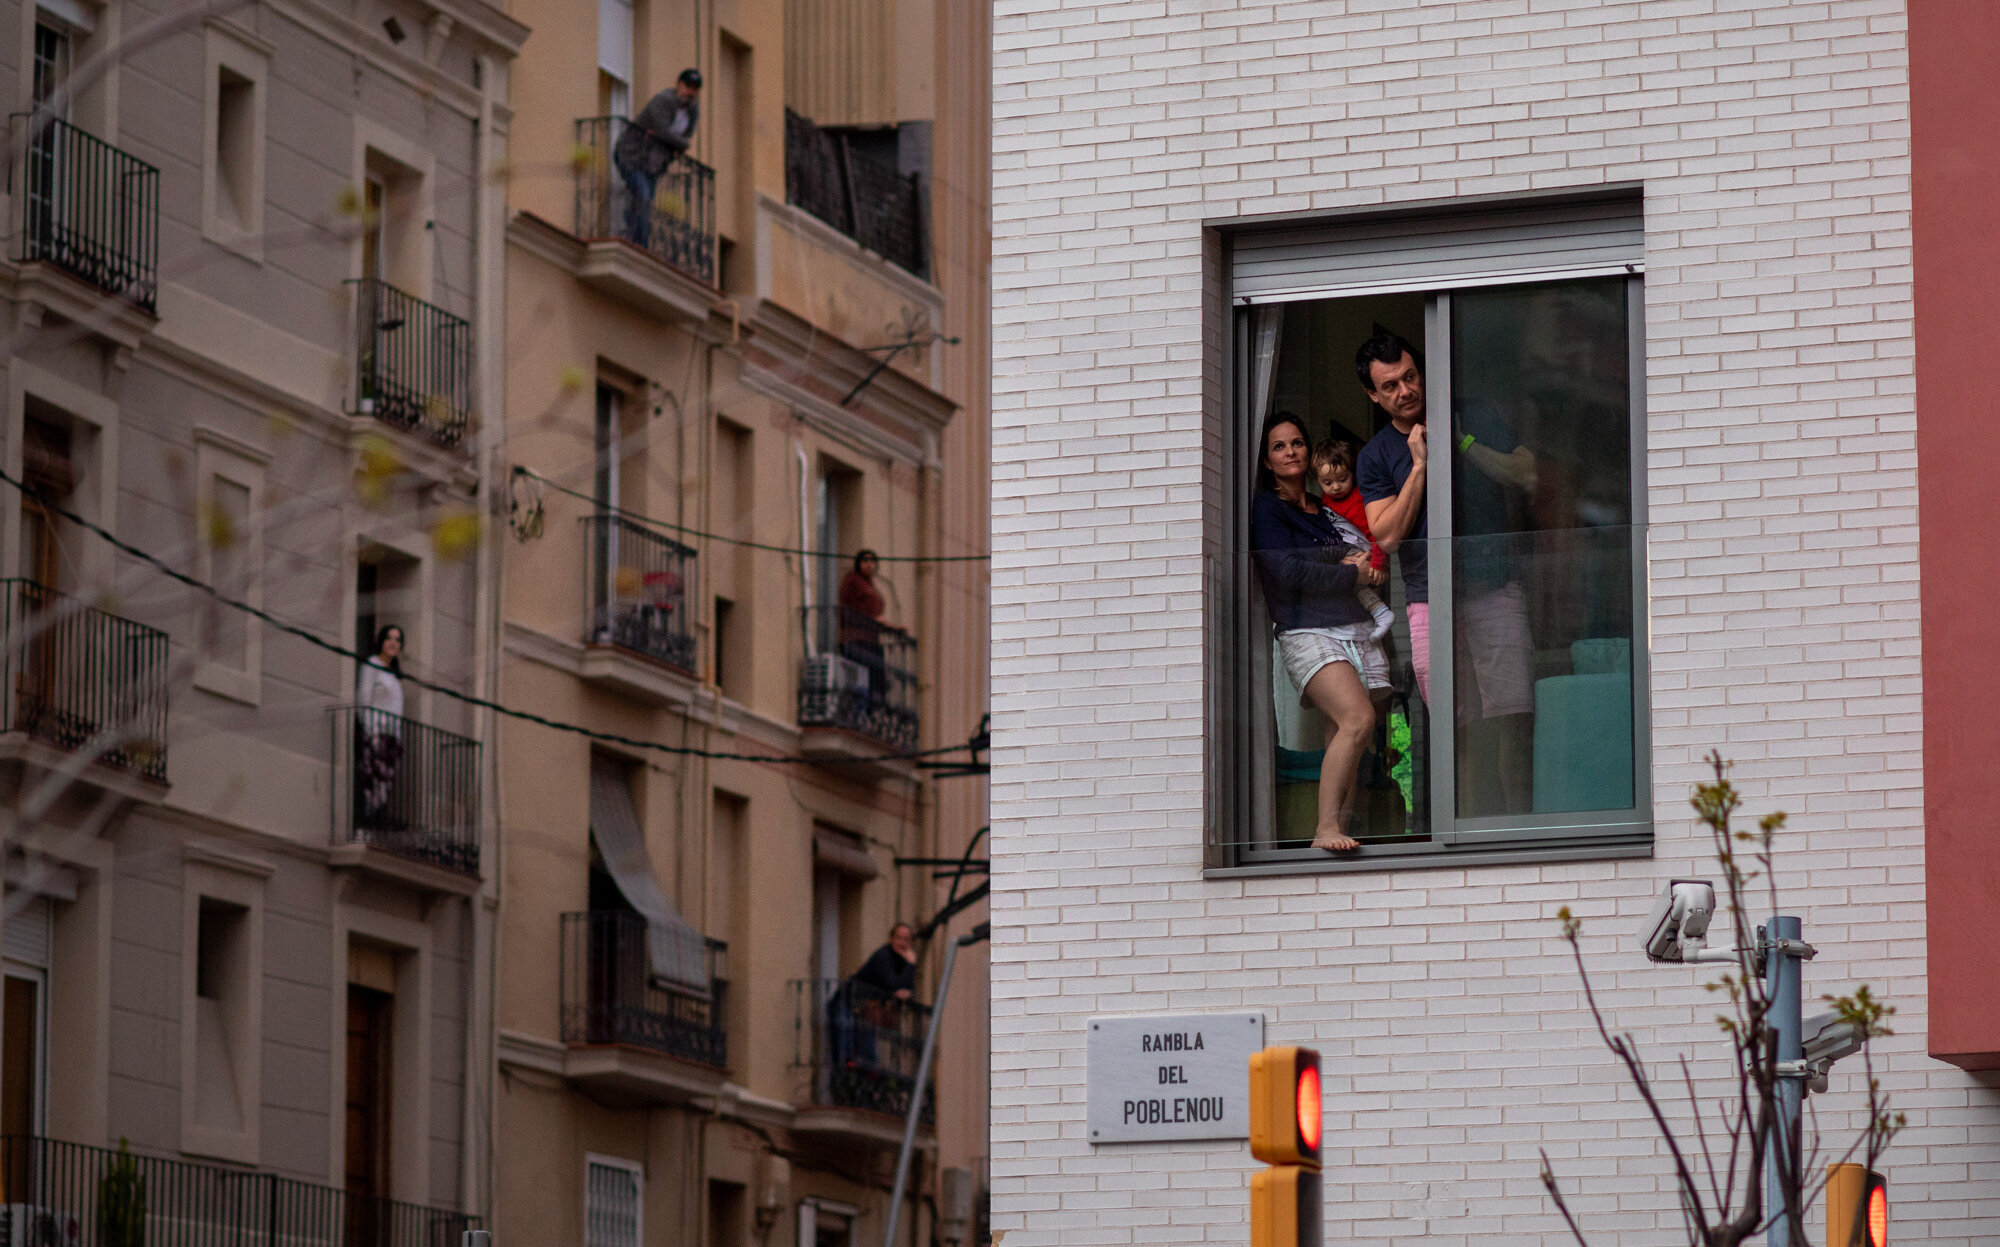  People stand in their balconies during a nationwide confinement to counter the coronavirus in Barcelona, Spain on March 29, 2020. (AP Photo/Emilio Morenatti) 